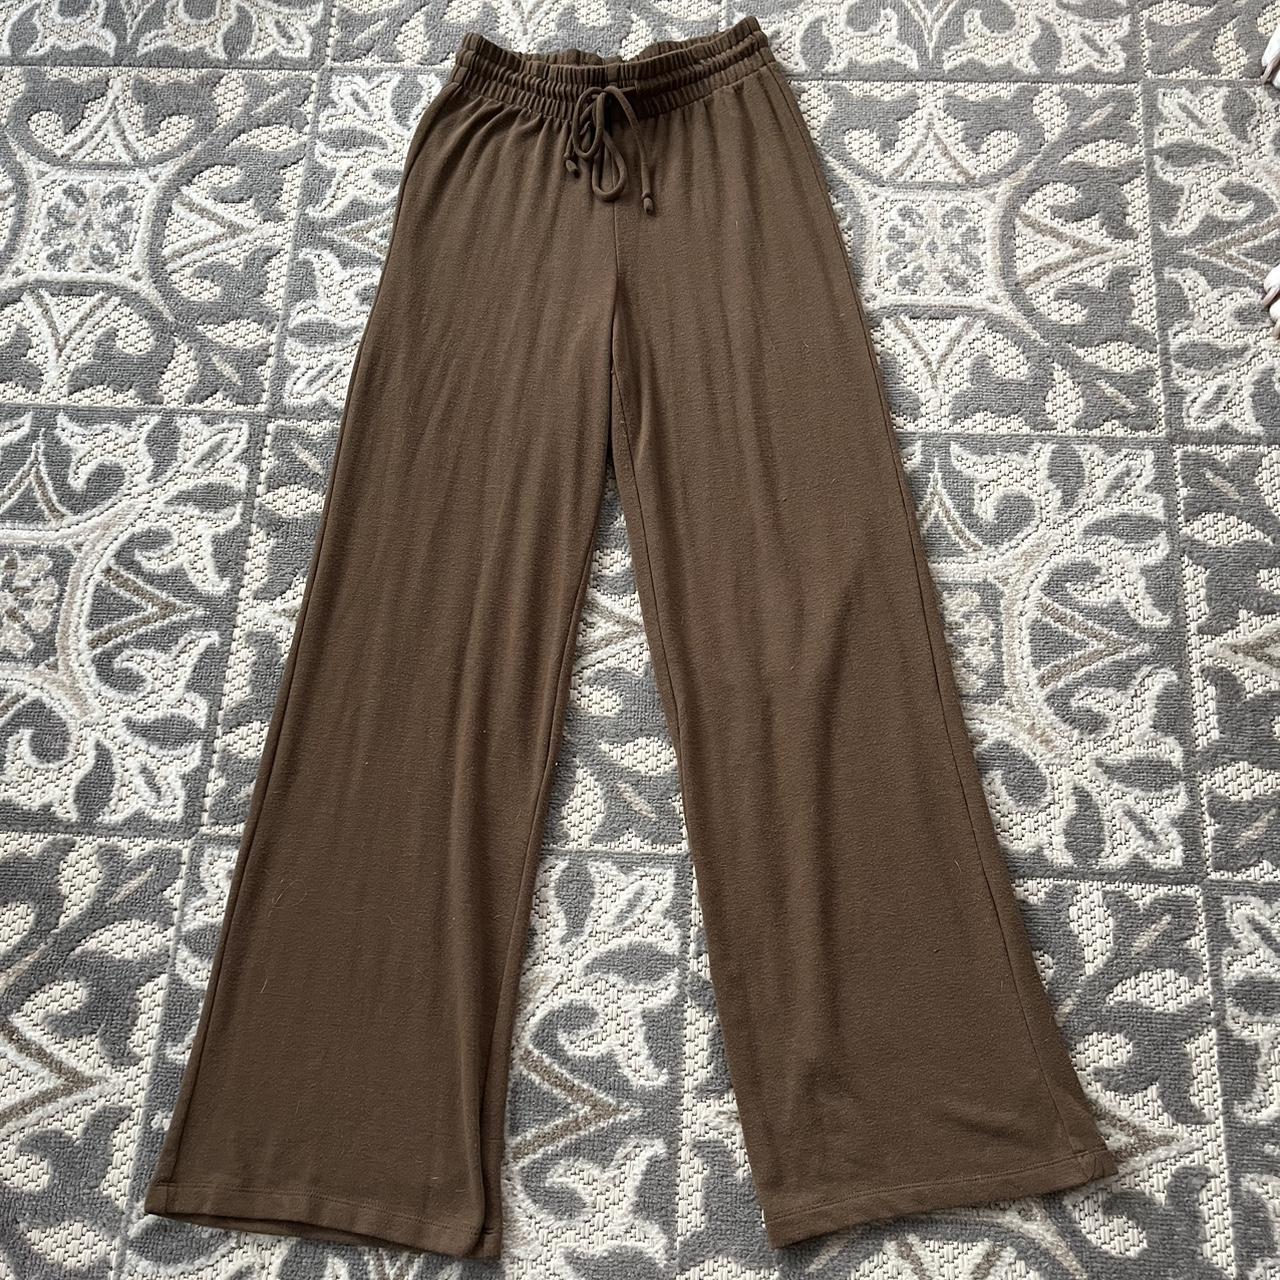 Aritzia comfy pants. They are more define at the top - Depop